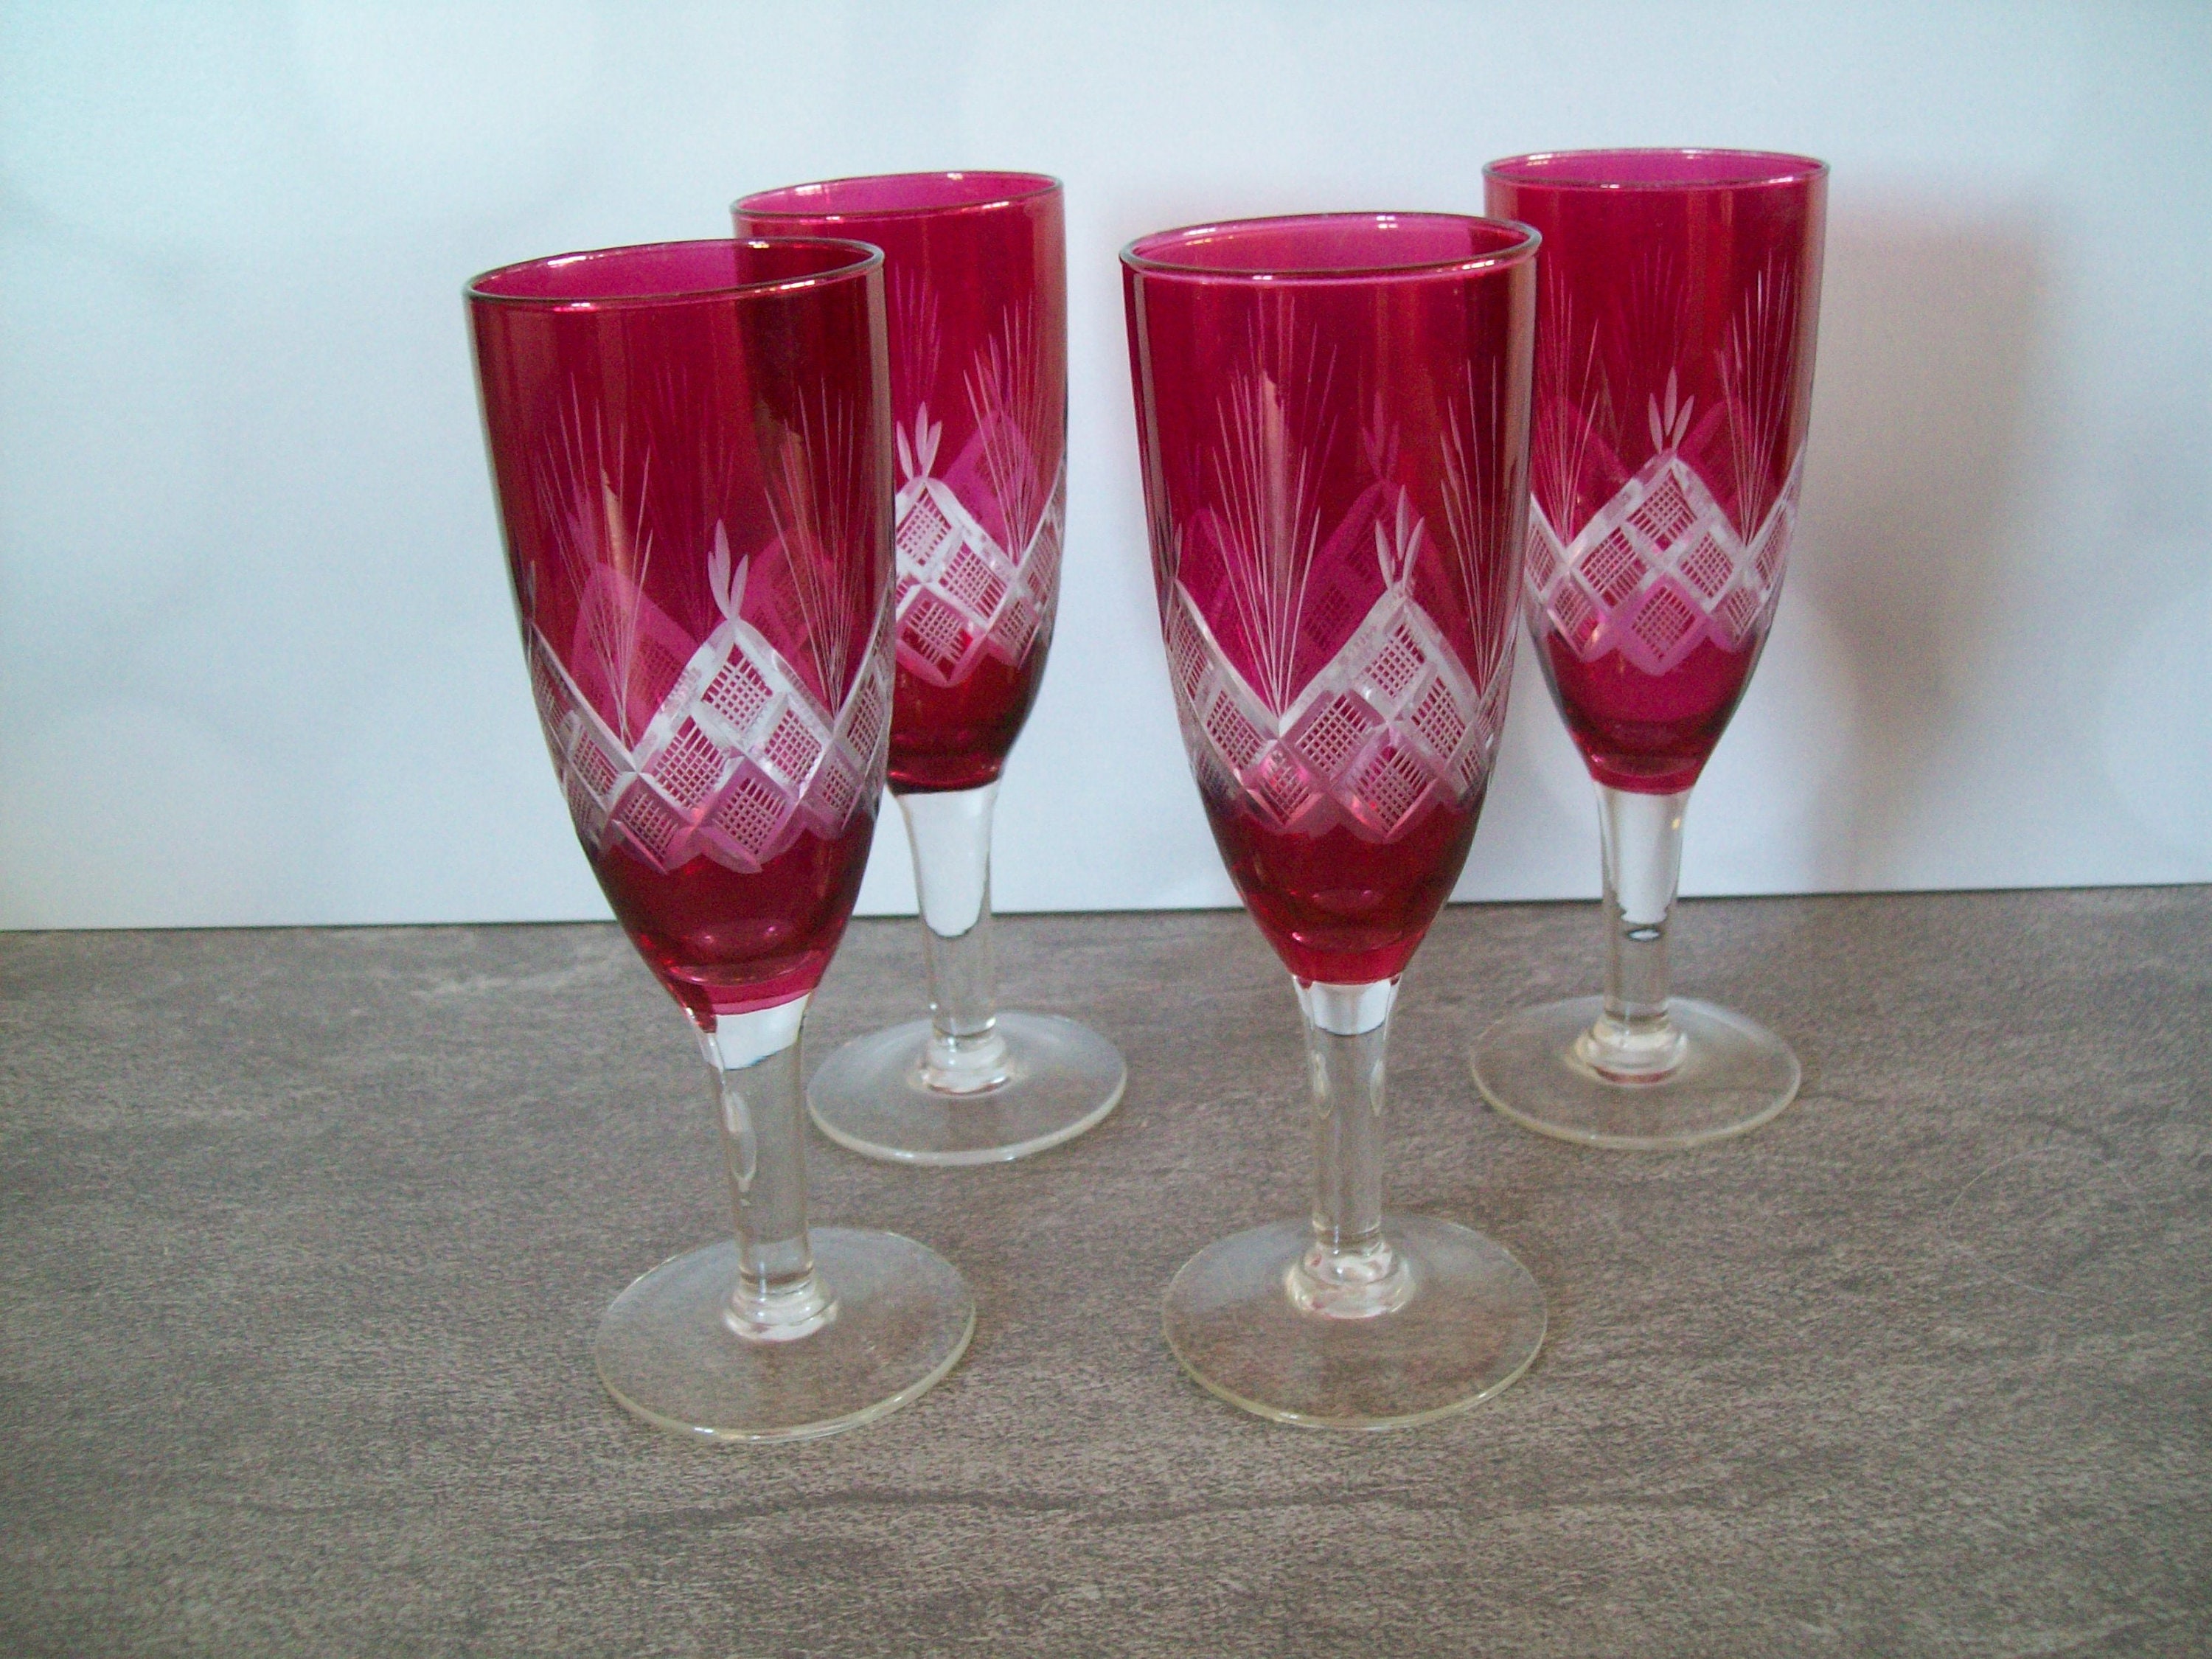 SHIQIKEJIPTY 12 Pieces Vintage Champagne Glass Patterned Plastic Champagne  Flutes Wedding Rose Pink …See more SHIQIKEJIPTY 12 Pieces Vintage Champagne